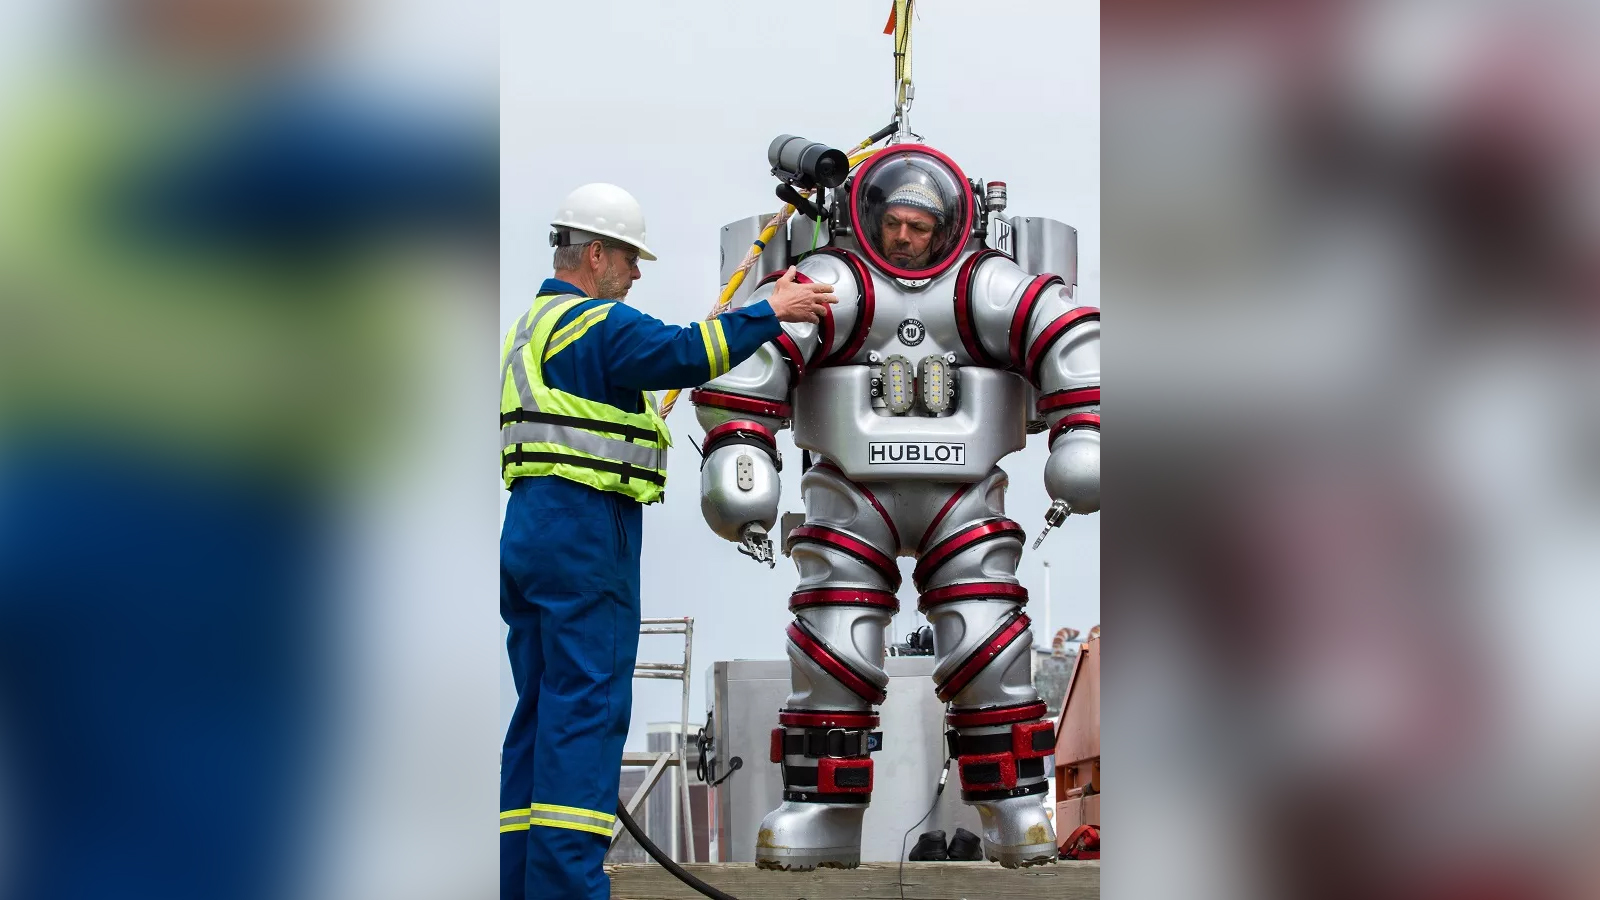 In September 2014, scientists explored the 2,000-year-old Antikythera shipwreck, looking for sunken statues, gold jewelry and other ancient artifacts lost in the Agean Sea. For the mission, they used the Exosuit (pictured here) that allowed the operator to safely descend hundreds of feet below the surface.